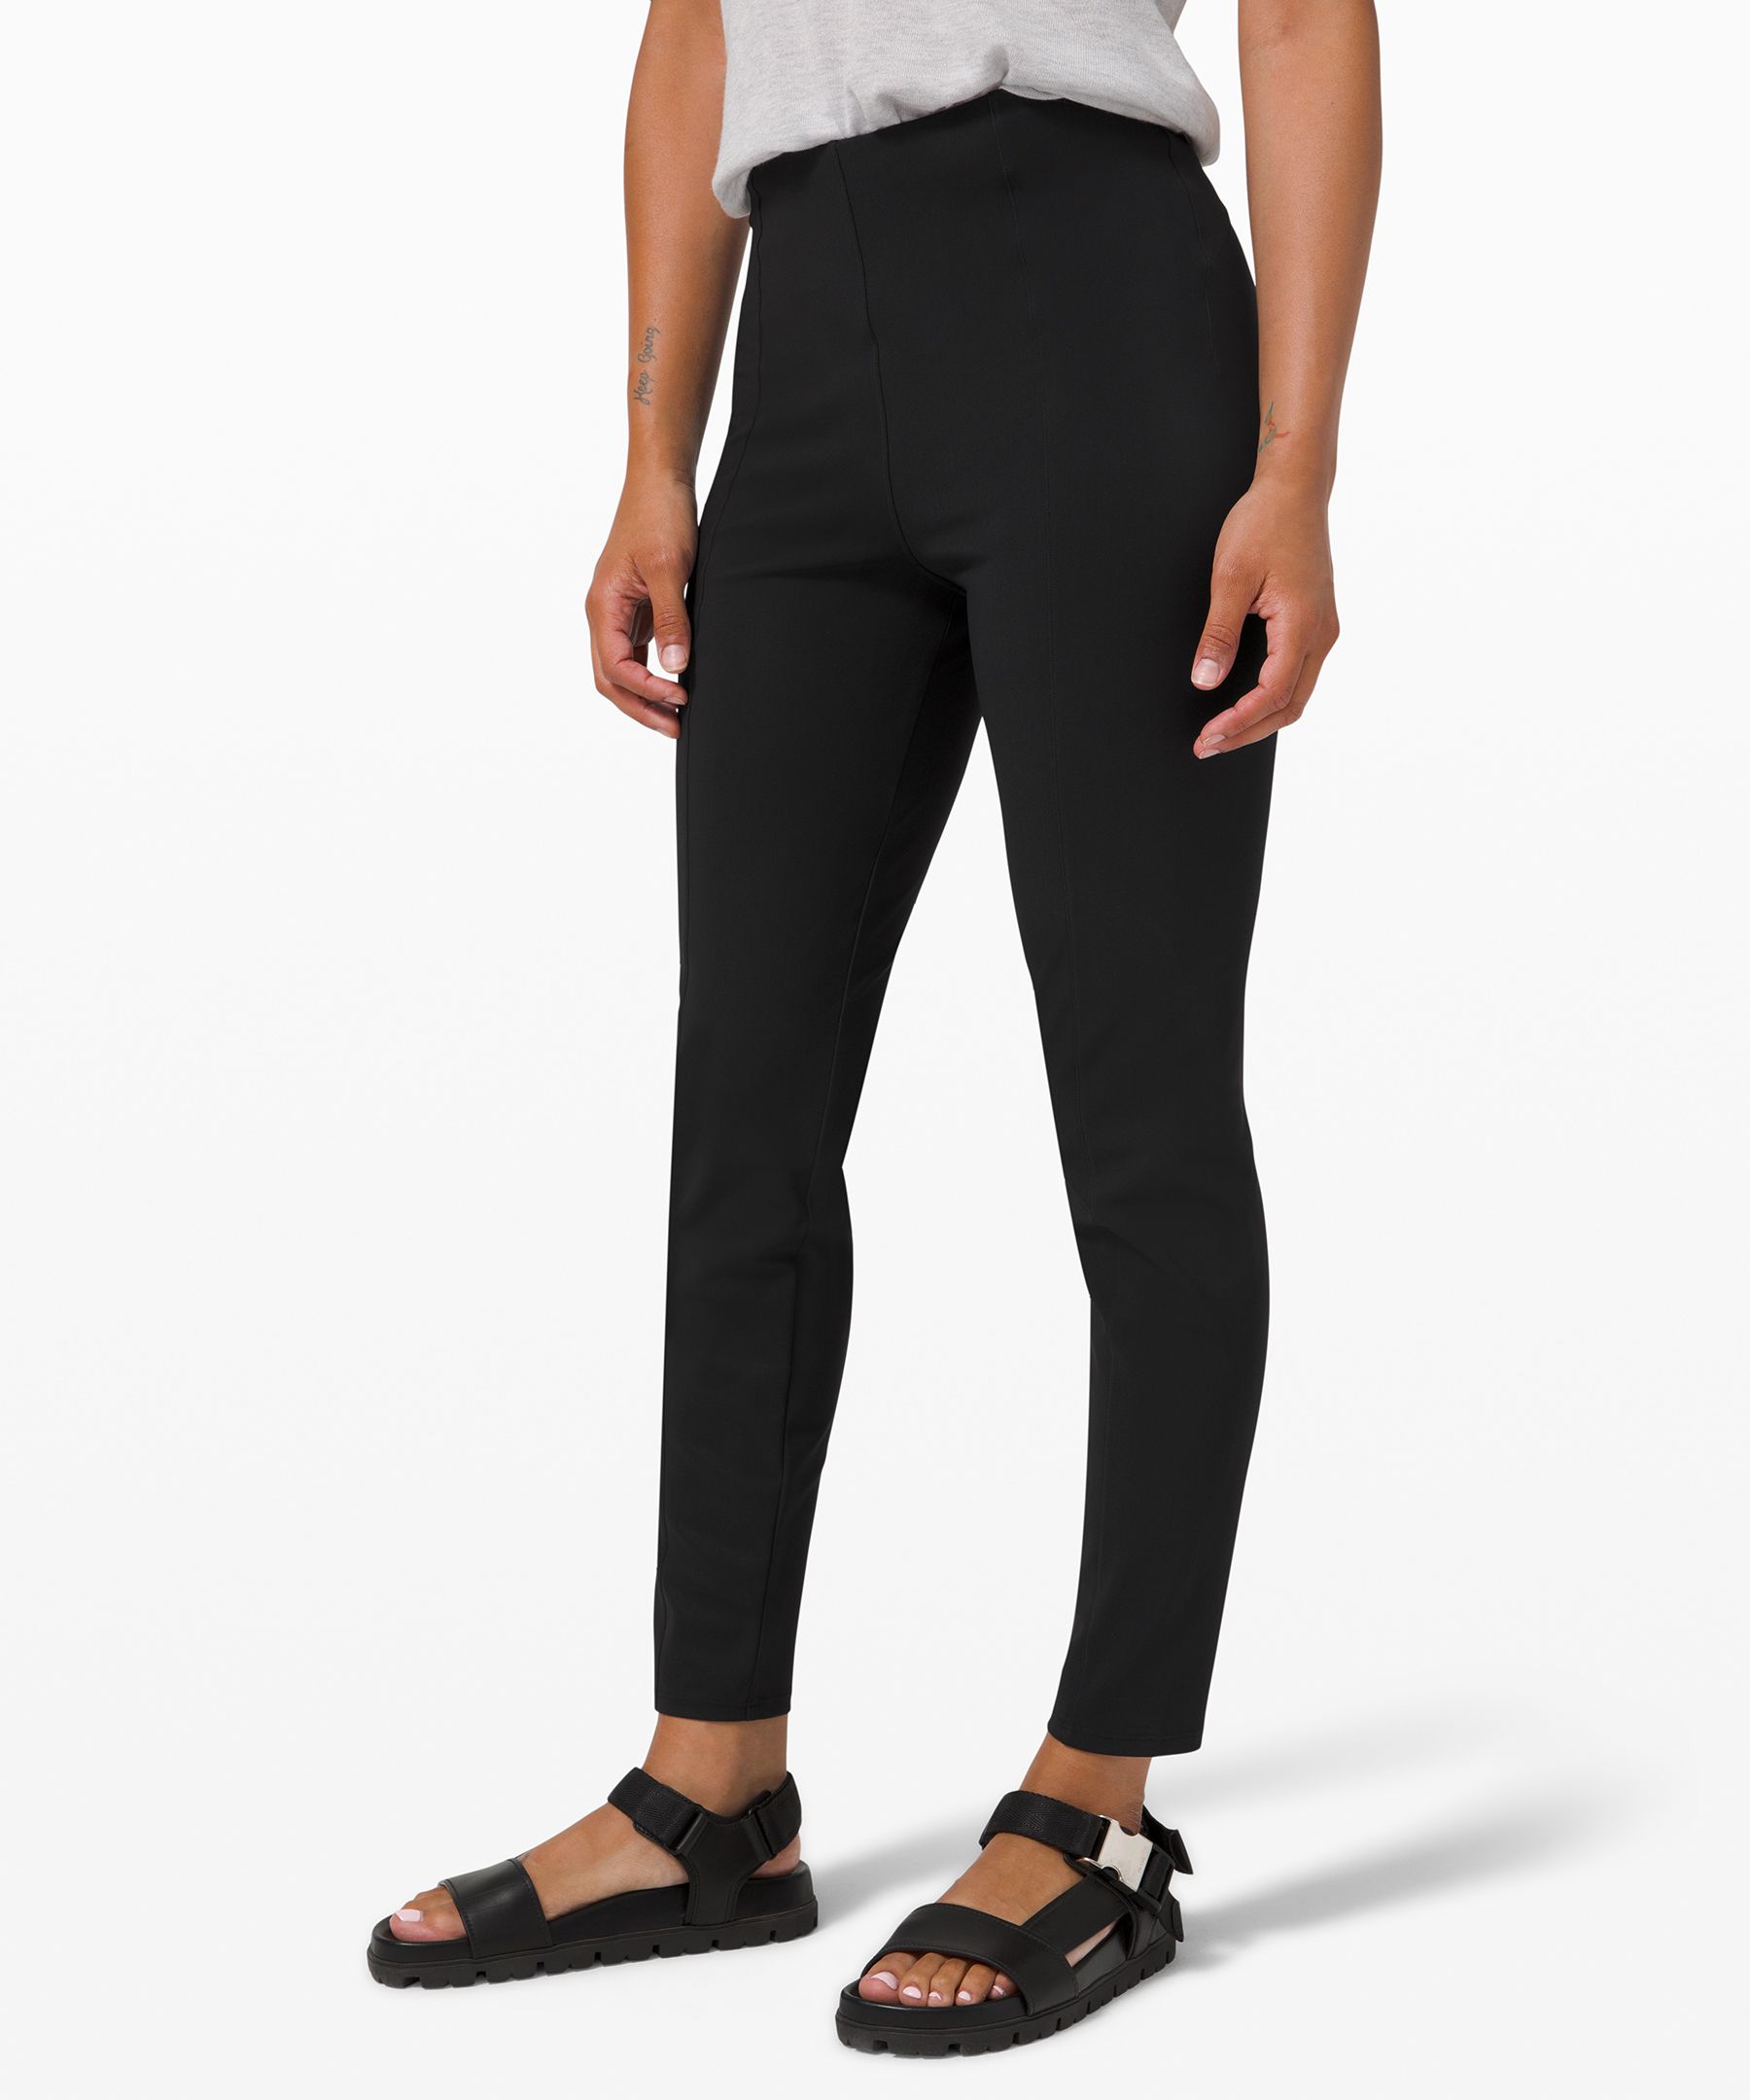 lululemon athletica, Pants & Jumpsuits, Lululemon Here To There High Rise  78 Pant